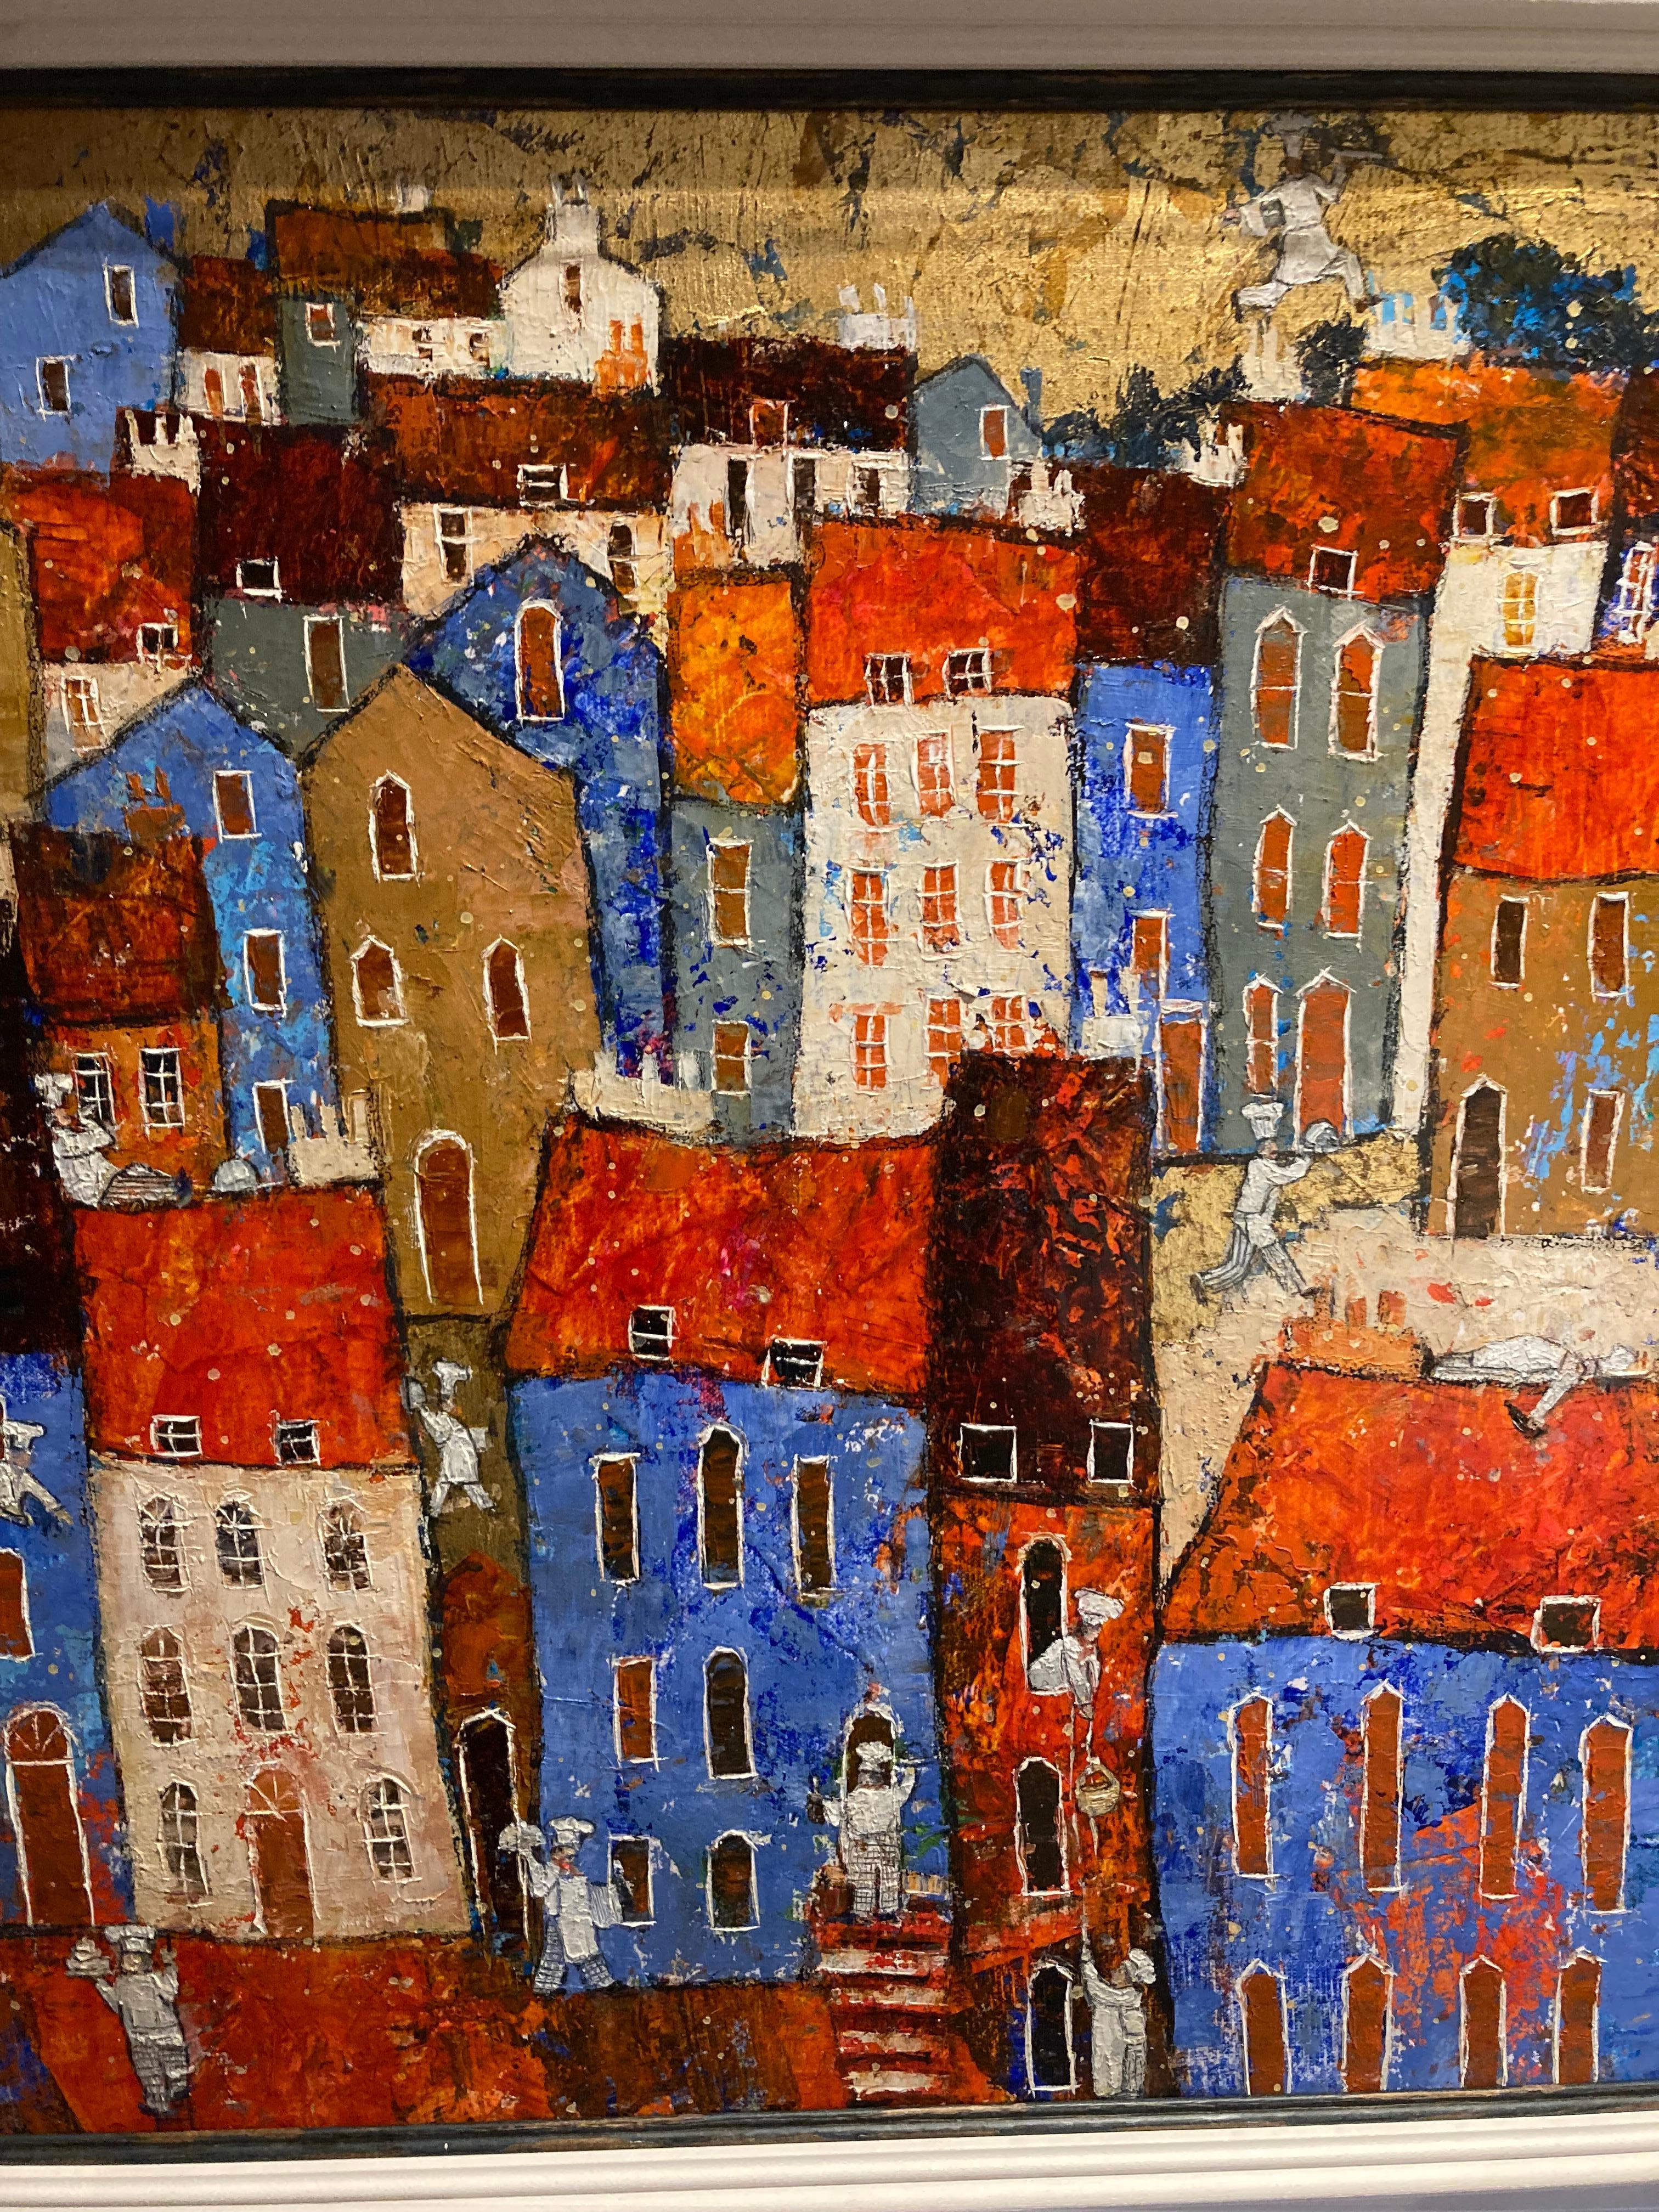 Cordon Bleu - contemporary figurative colorful townscape mixed media painting - Painting by Ellie Hesse